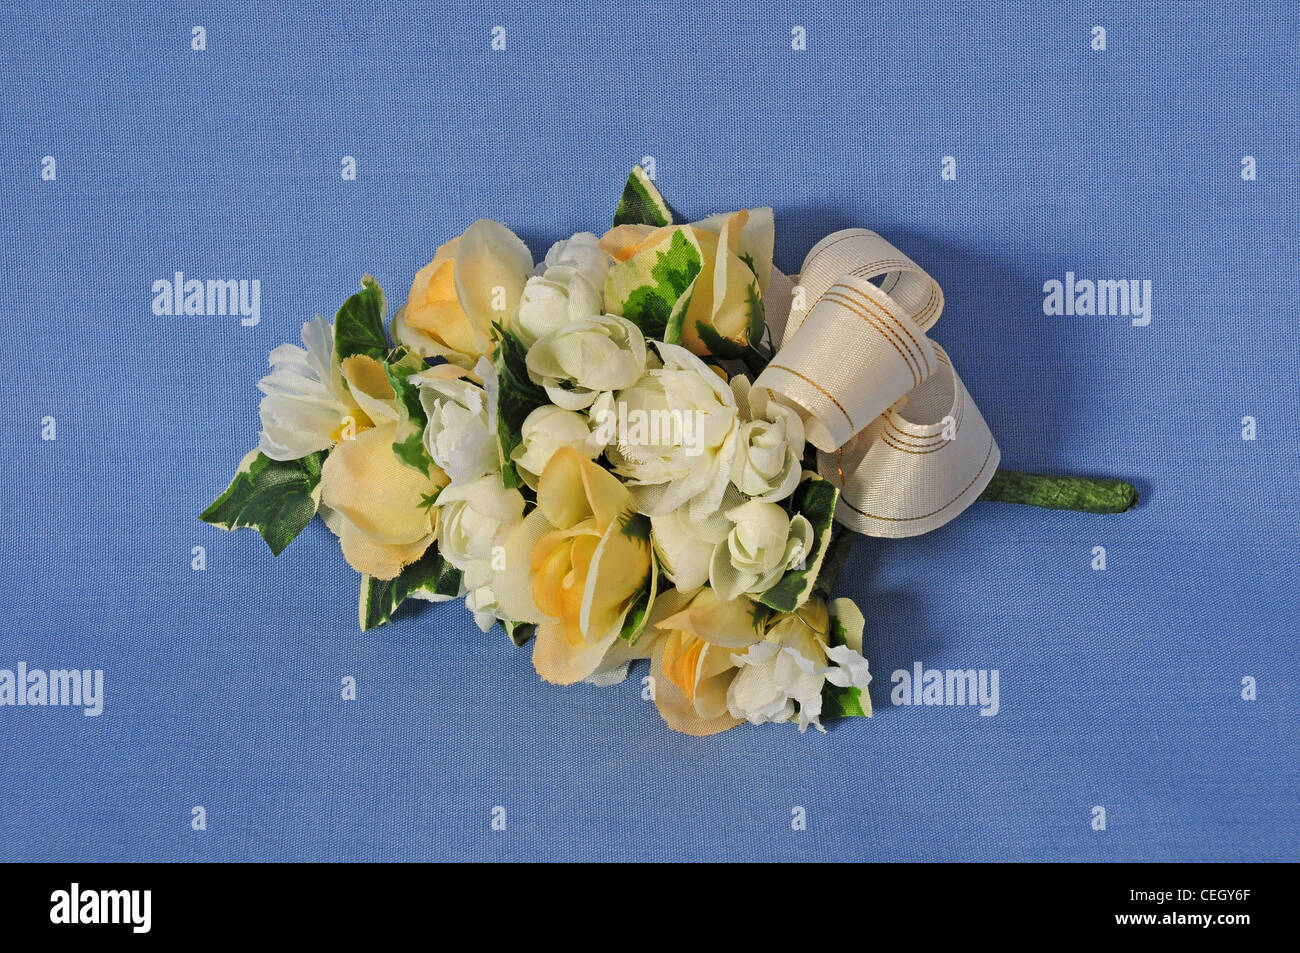 Wedding corsage made from artificial flowers Stock Photo